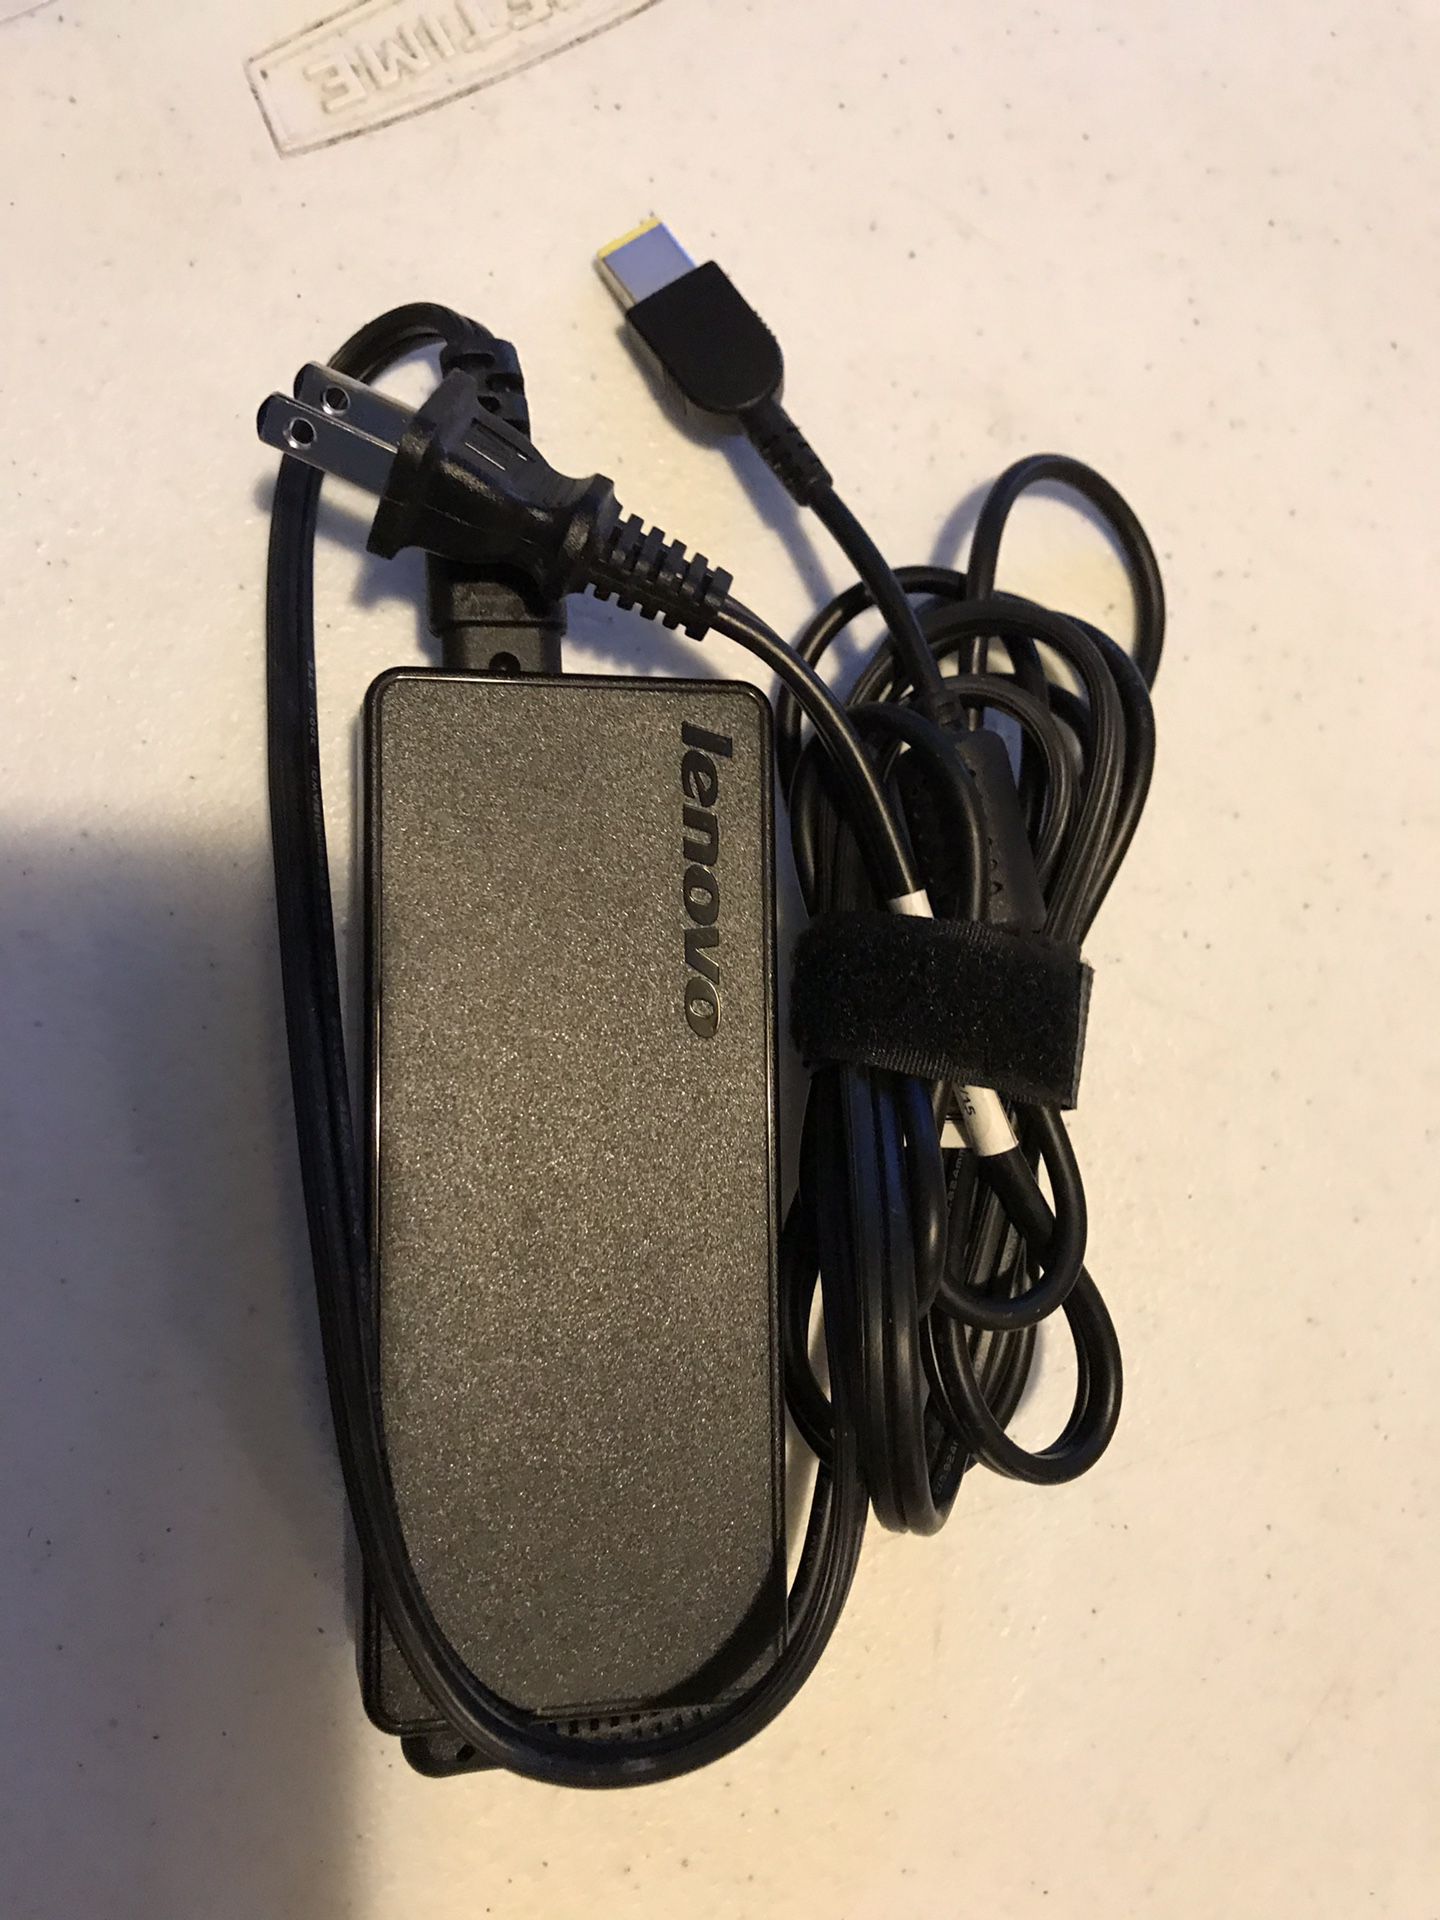 20 Lenovo laptop chargers